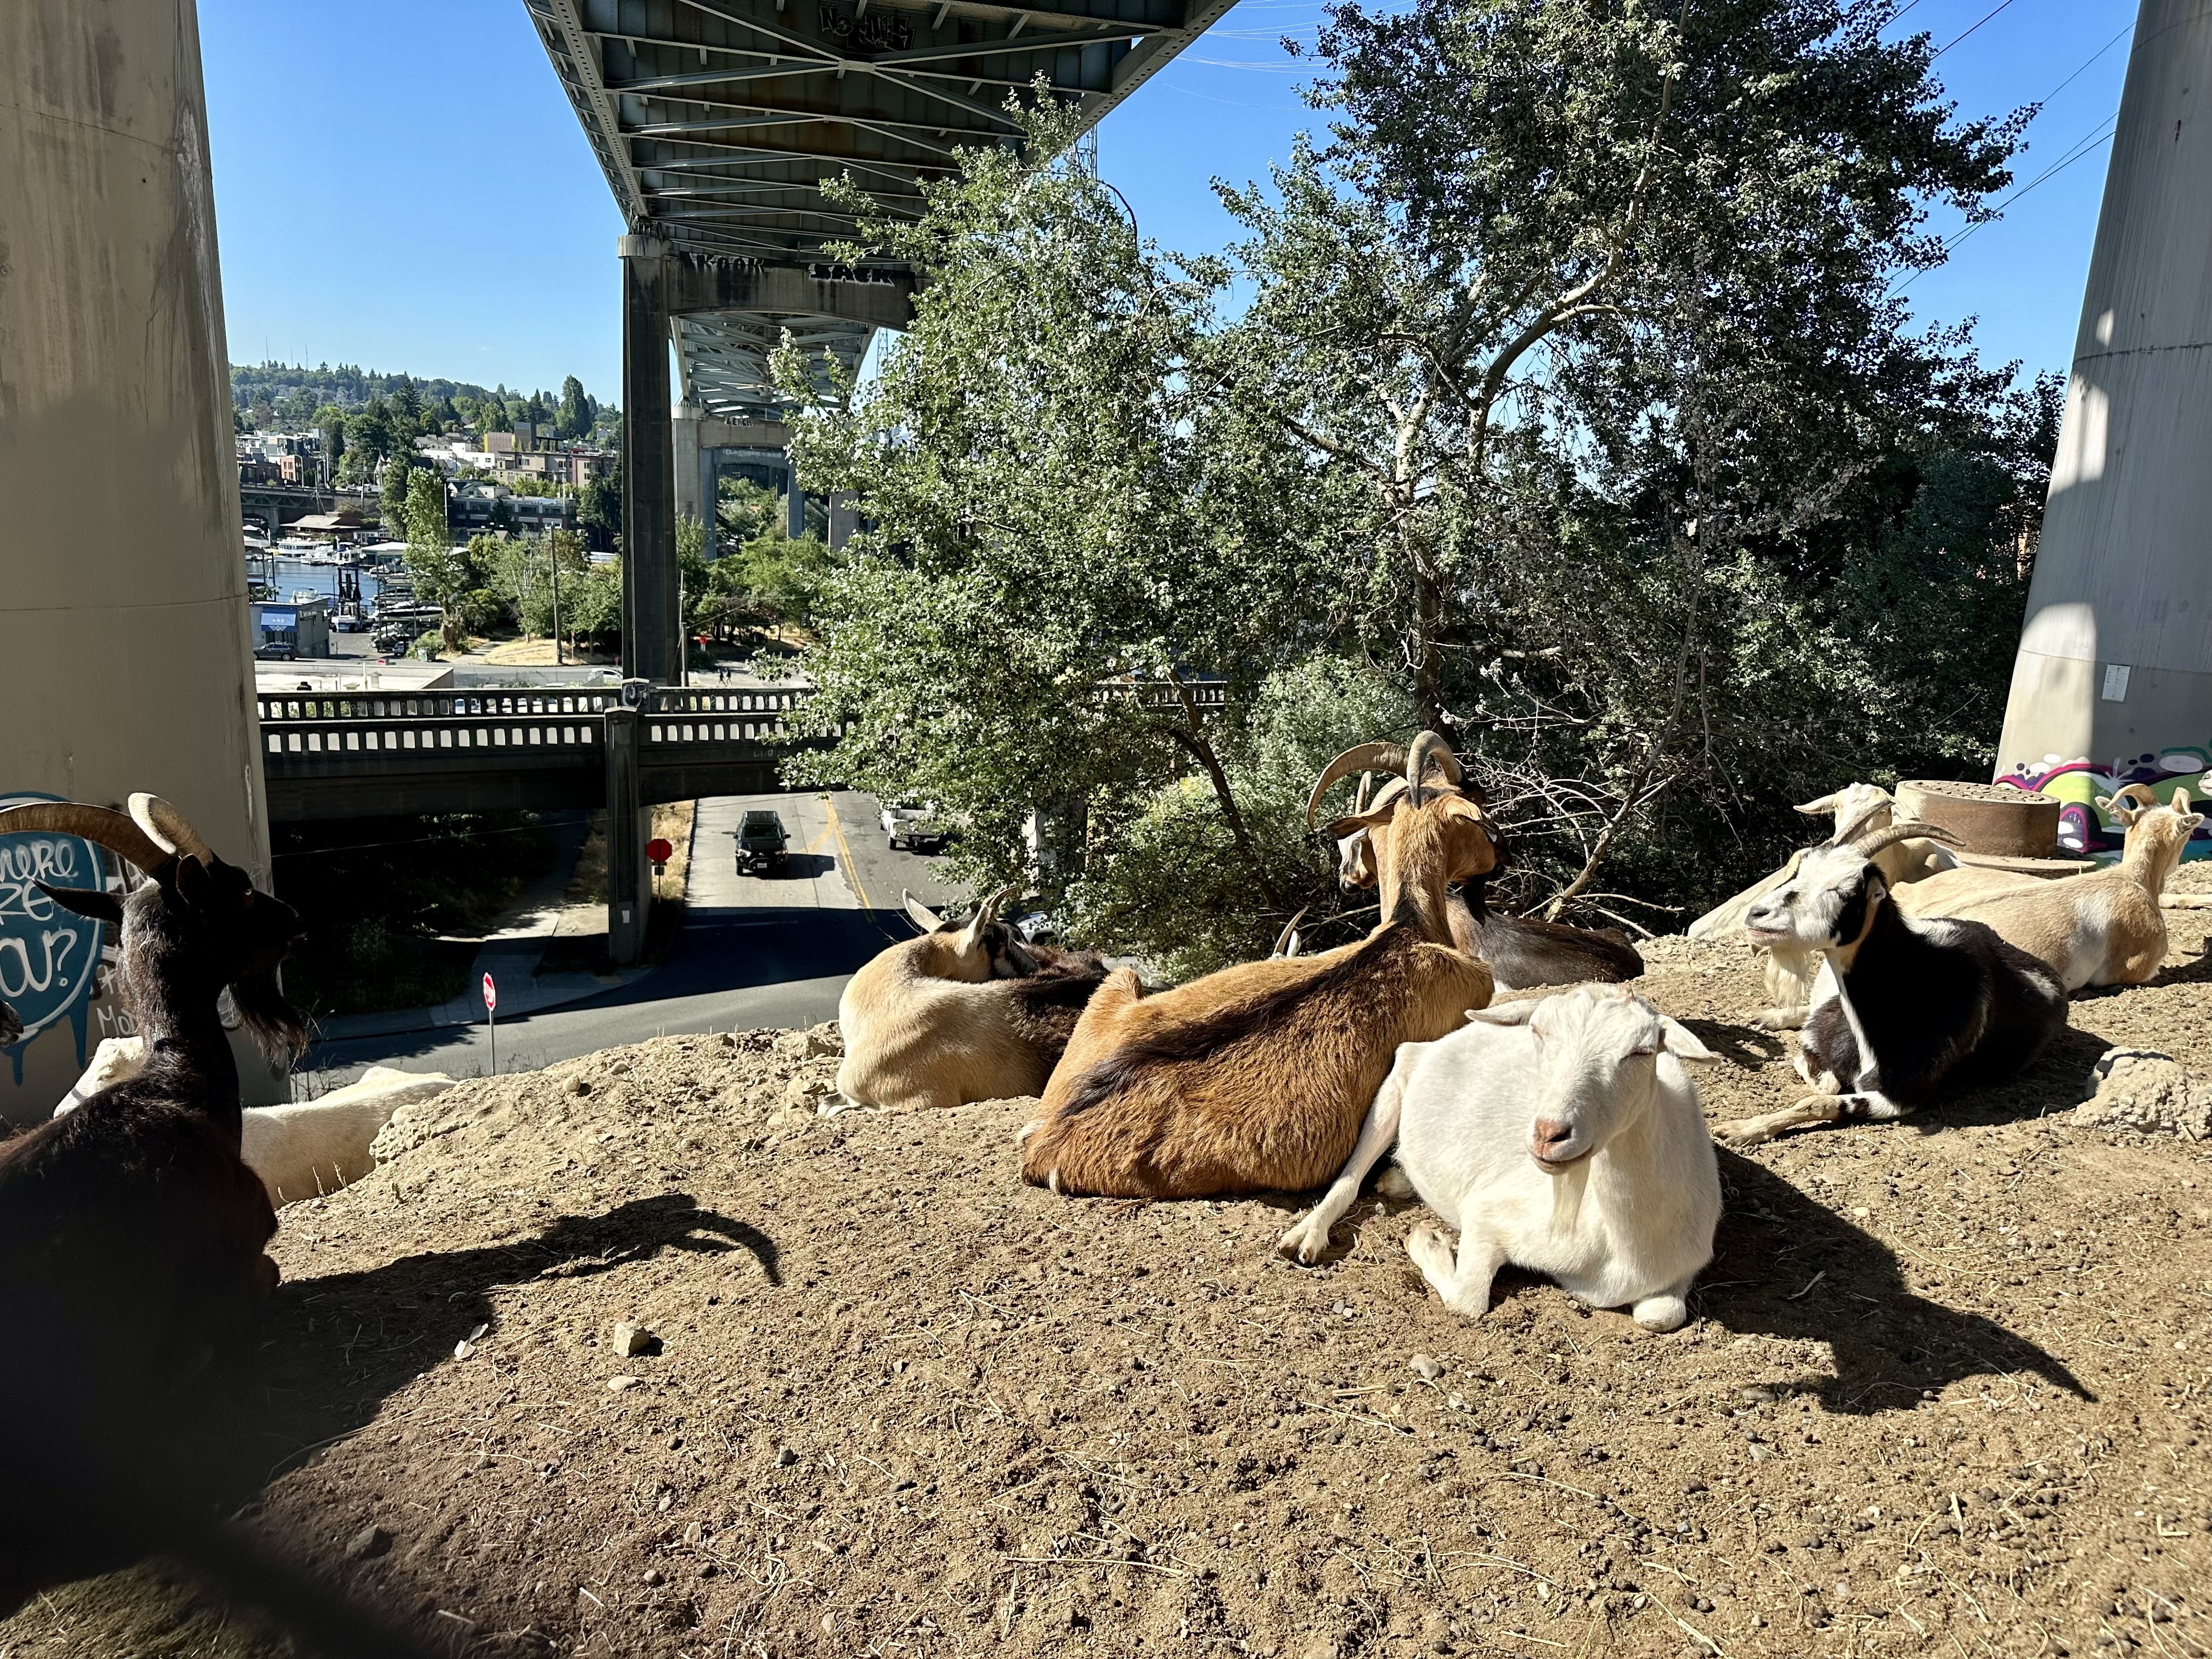 Goats lounging around under the freeway which is visible overhead and the supports to the sides, with a tree nearby.